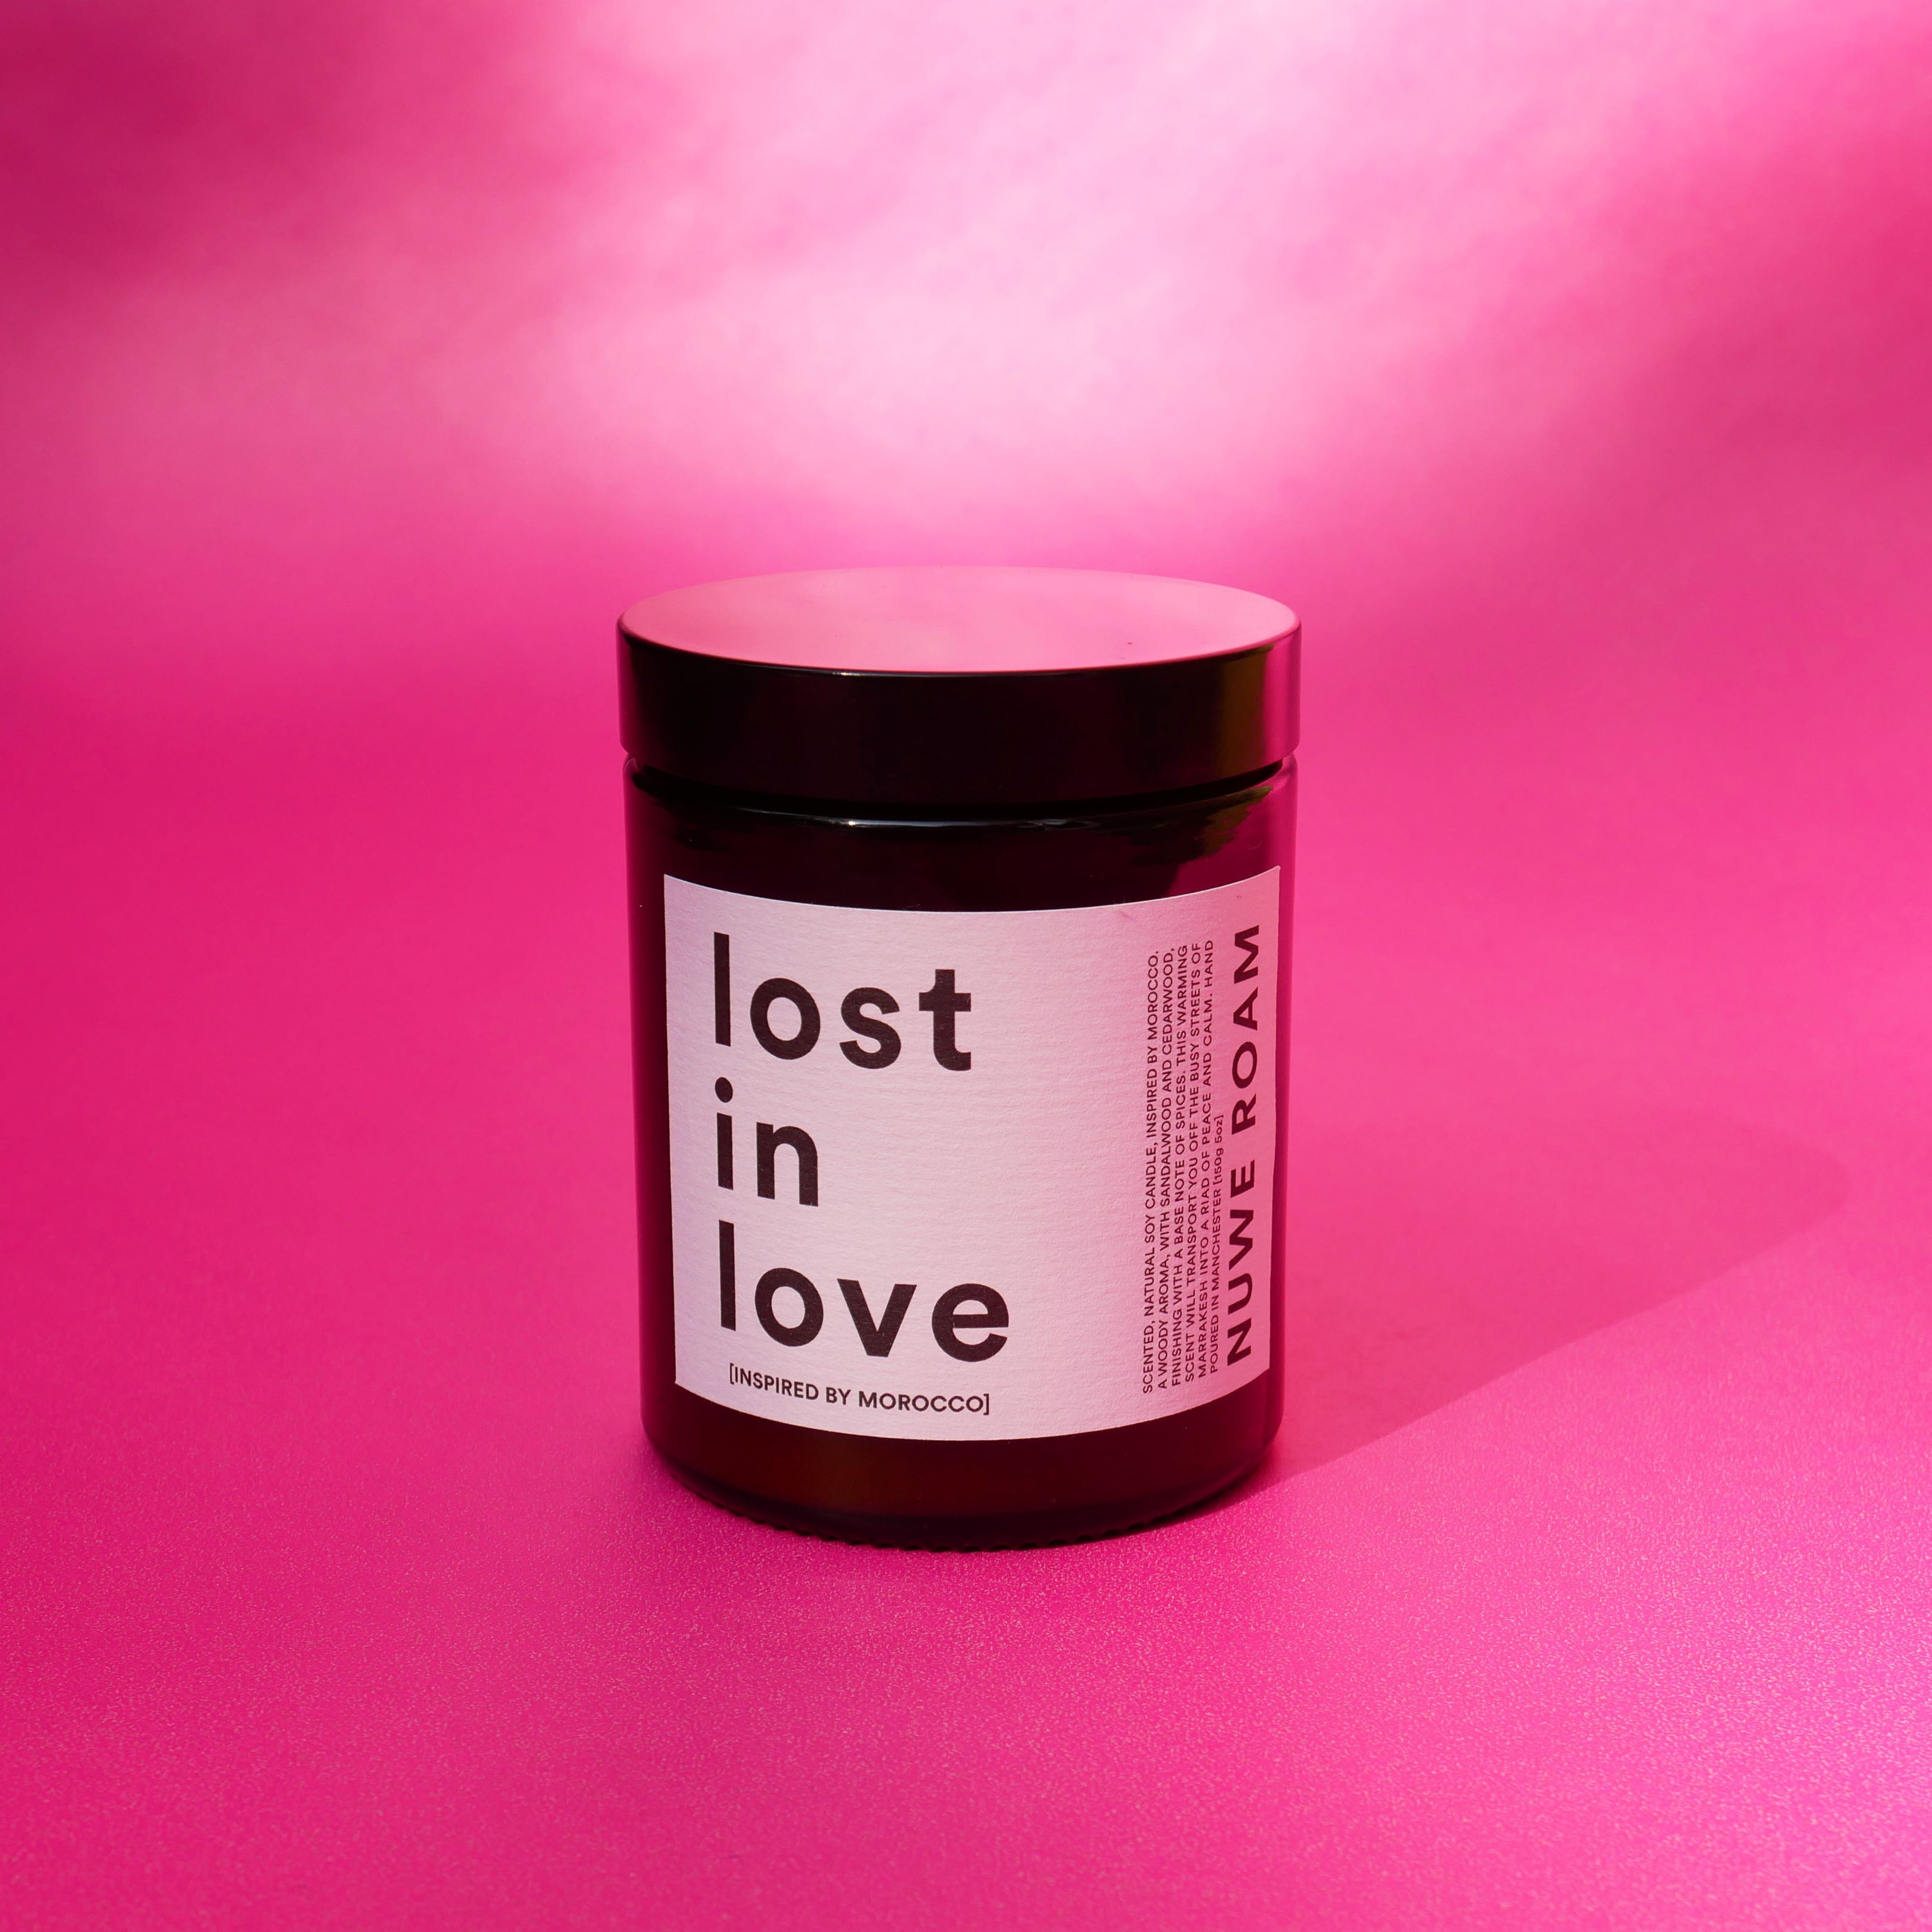 'LOST IN LOVE' SANDALWOOD SCENTED CANDLE